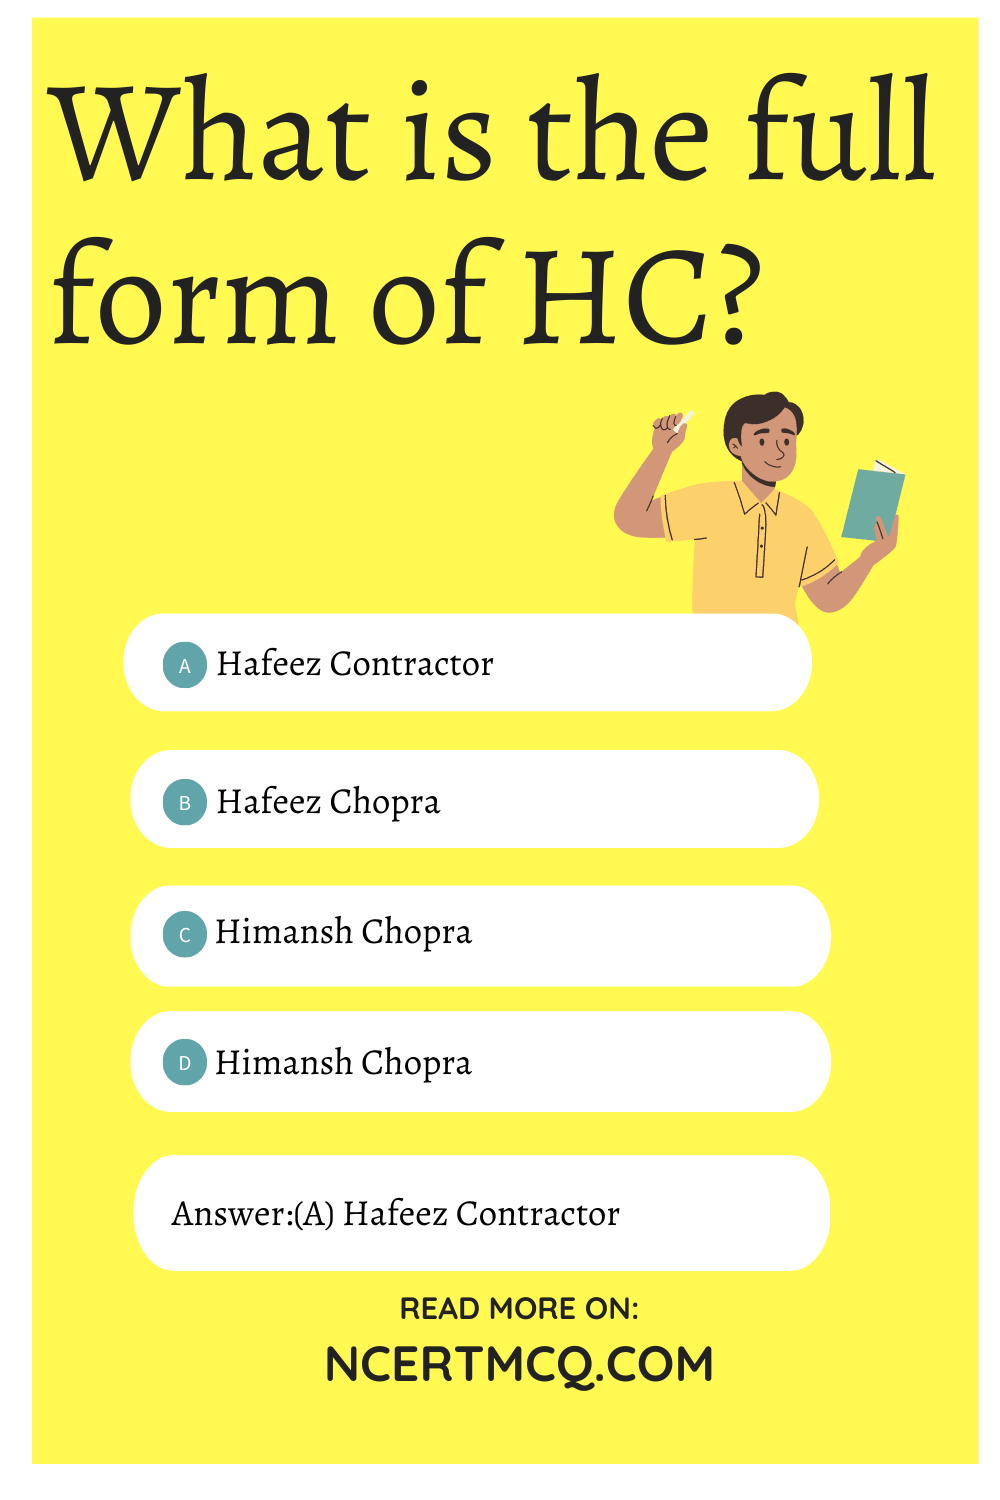 What is the full form of HC?